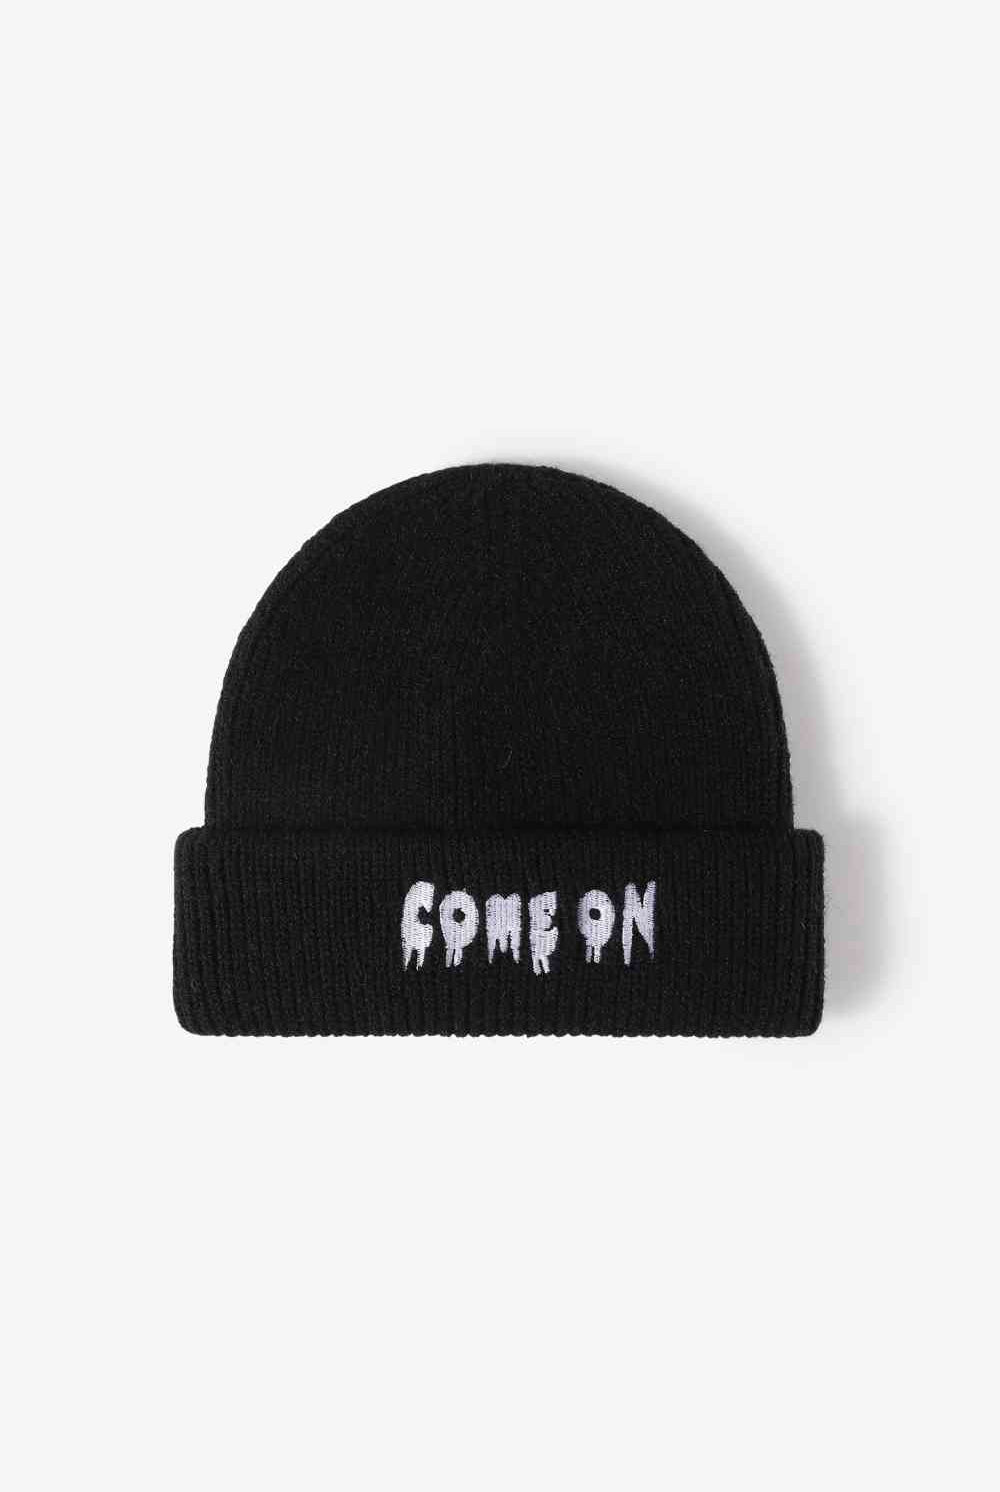 Black COME ON Embroidered Cuff Knit Beanie Winter Accessories